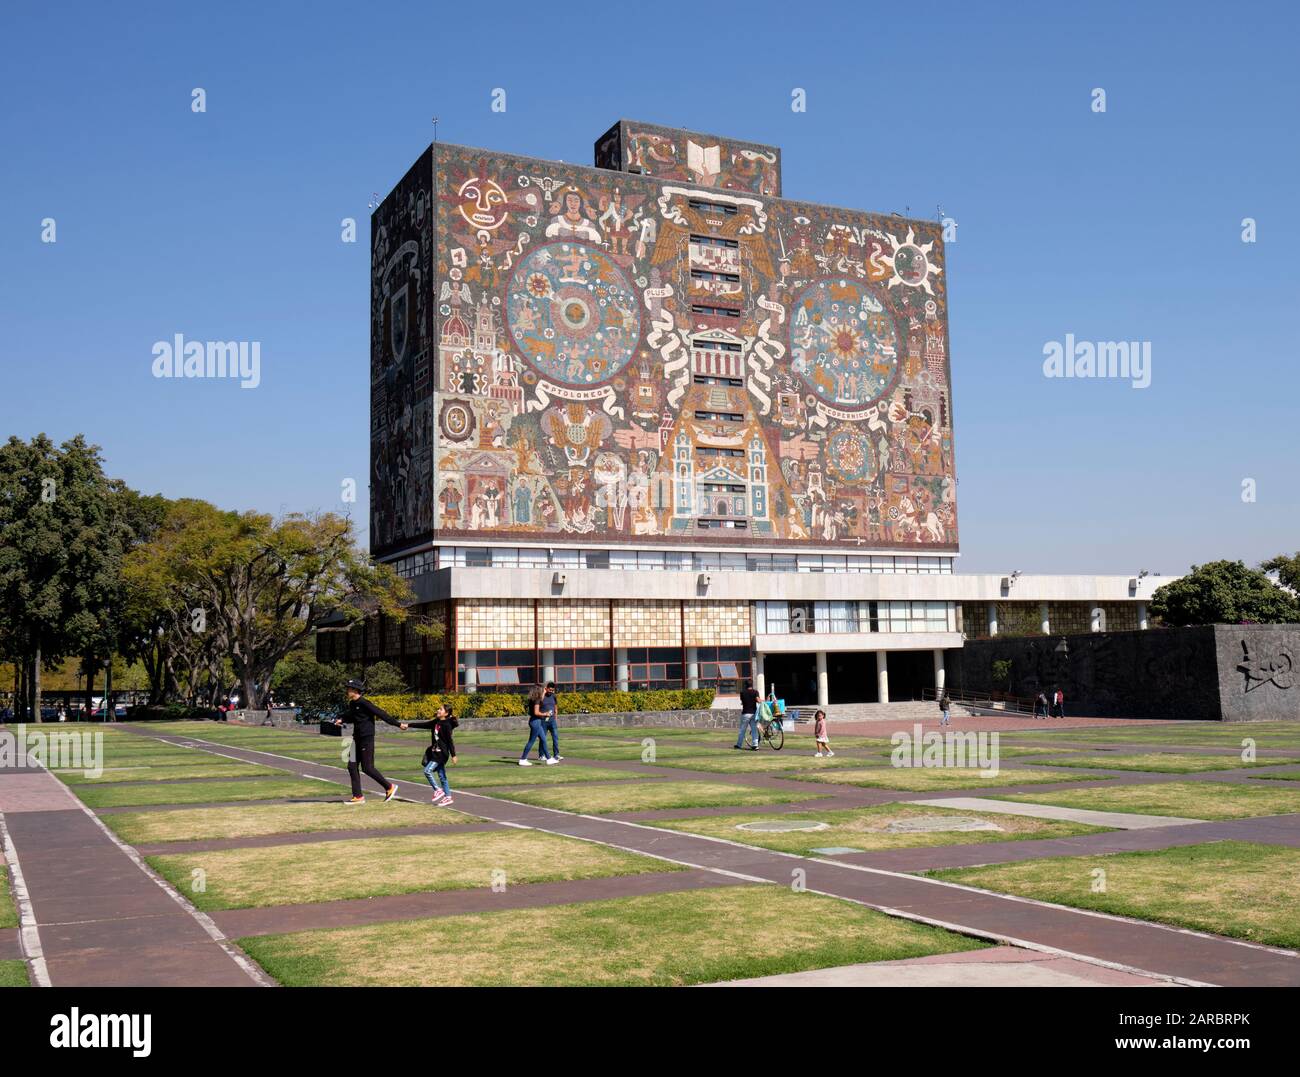 Mexico city University campus library iconic facade  created by the Mexican artist Juan O'Gorman with people walking by Stock Photo